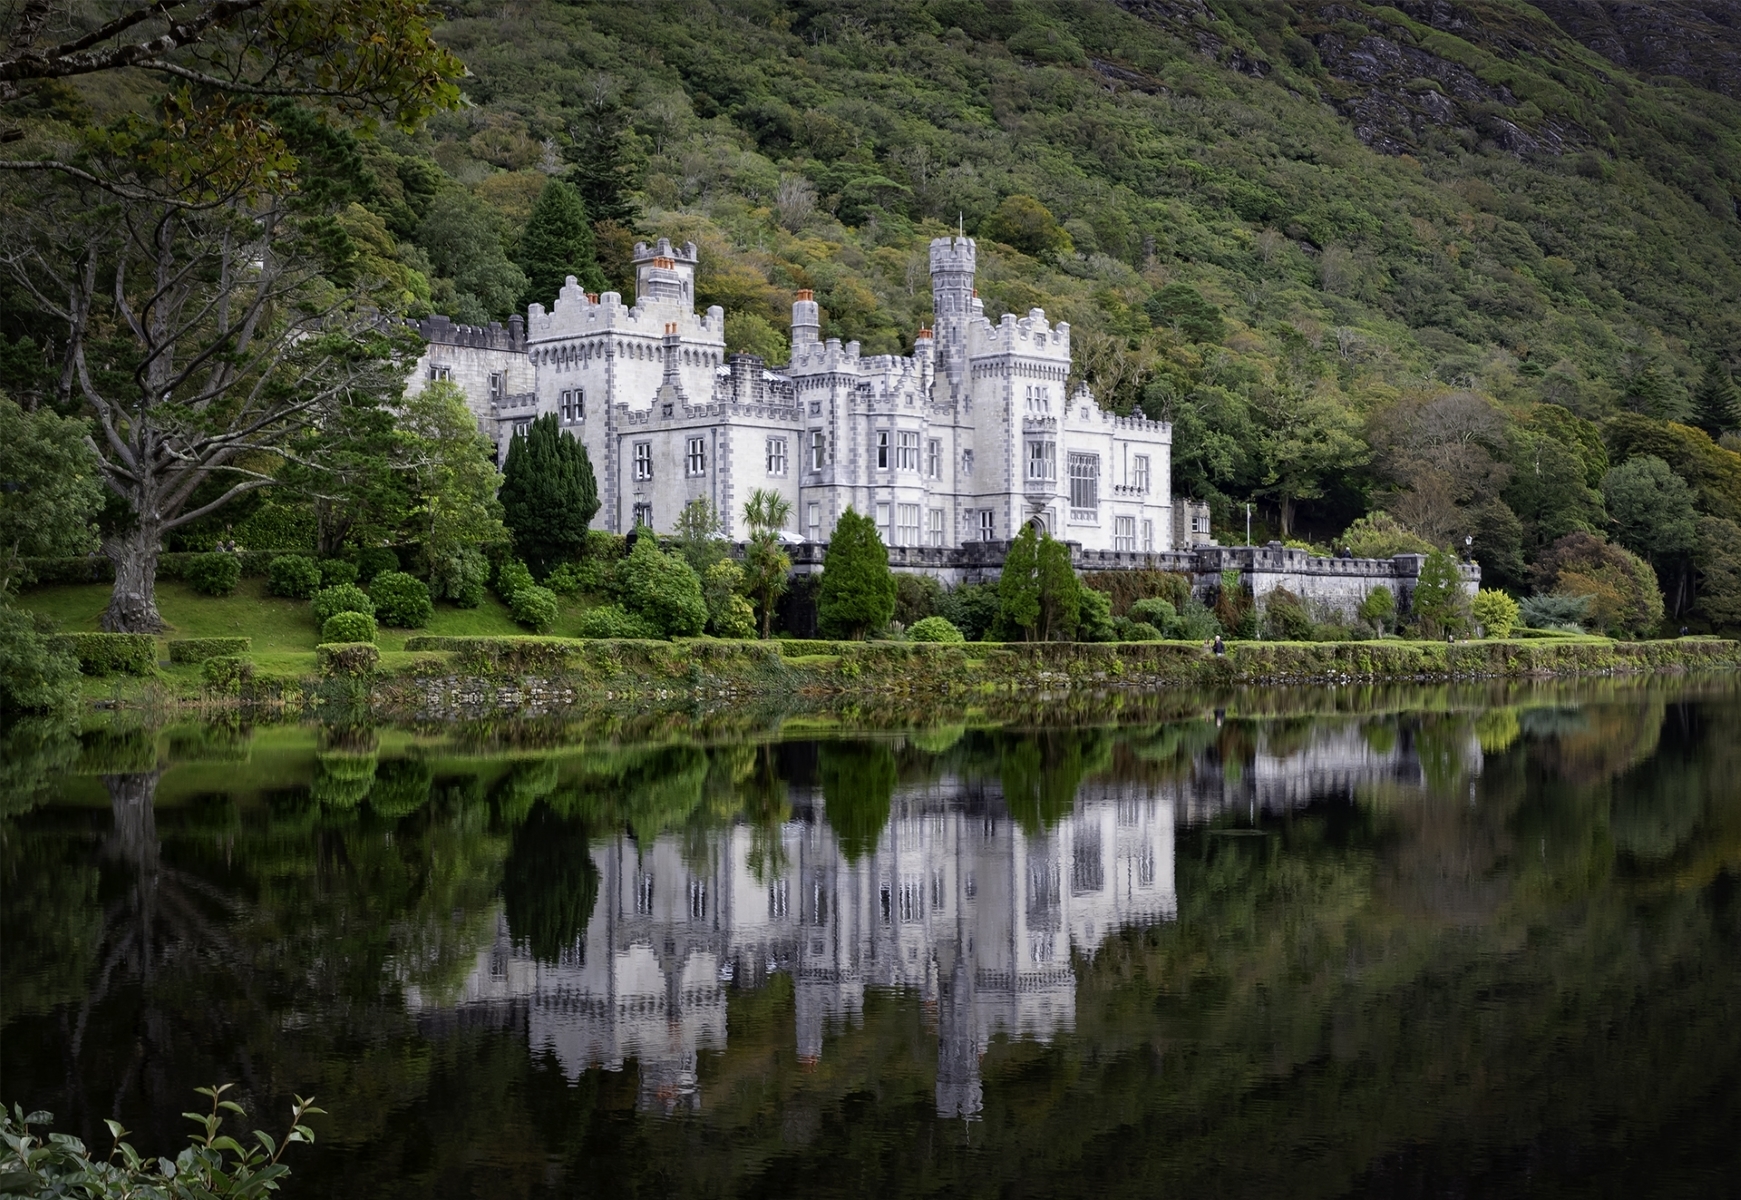 Kylemore-Abbey-Pollacappul-County-Galway-Ireland-PA-1-Place-by-Richard-Finn-LV